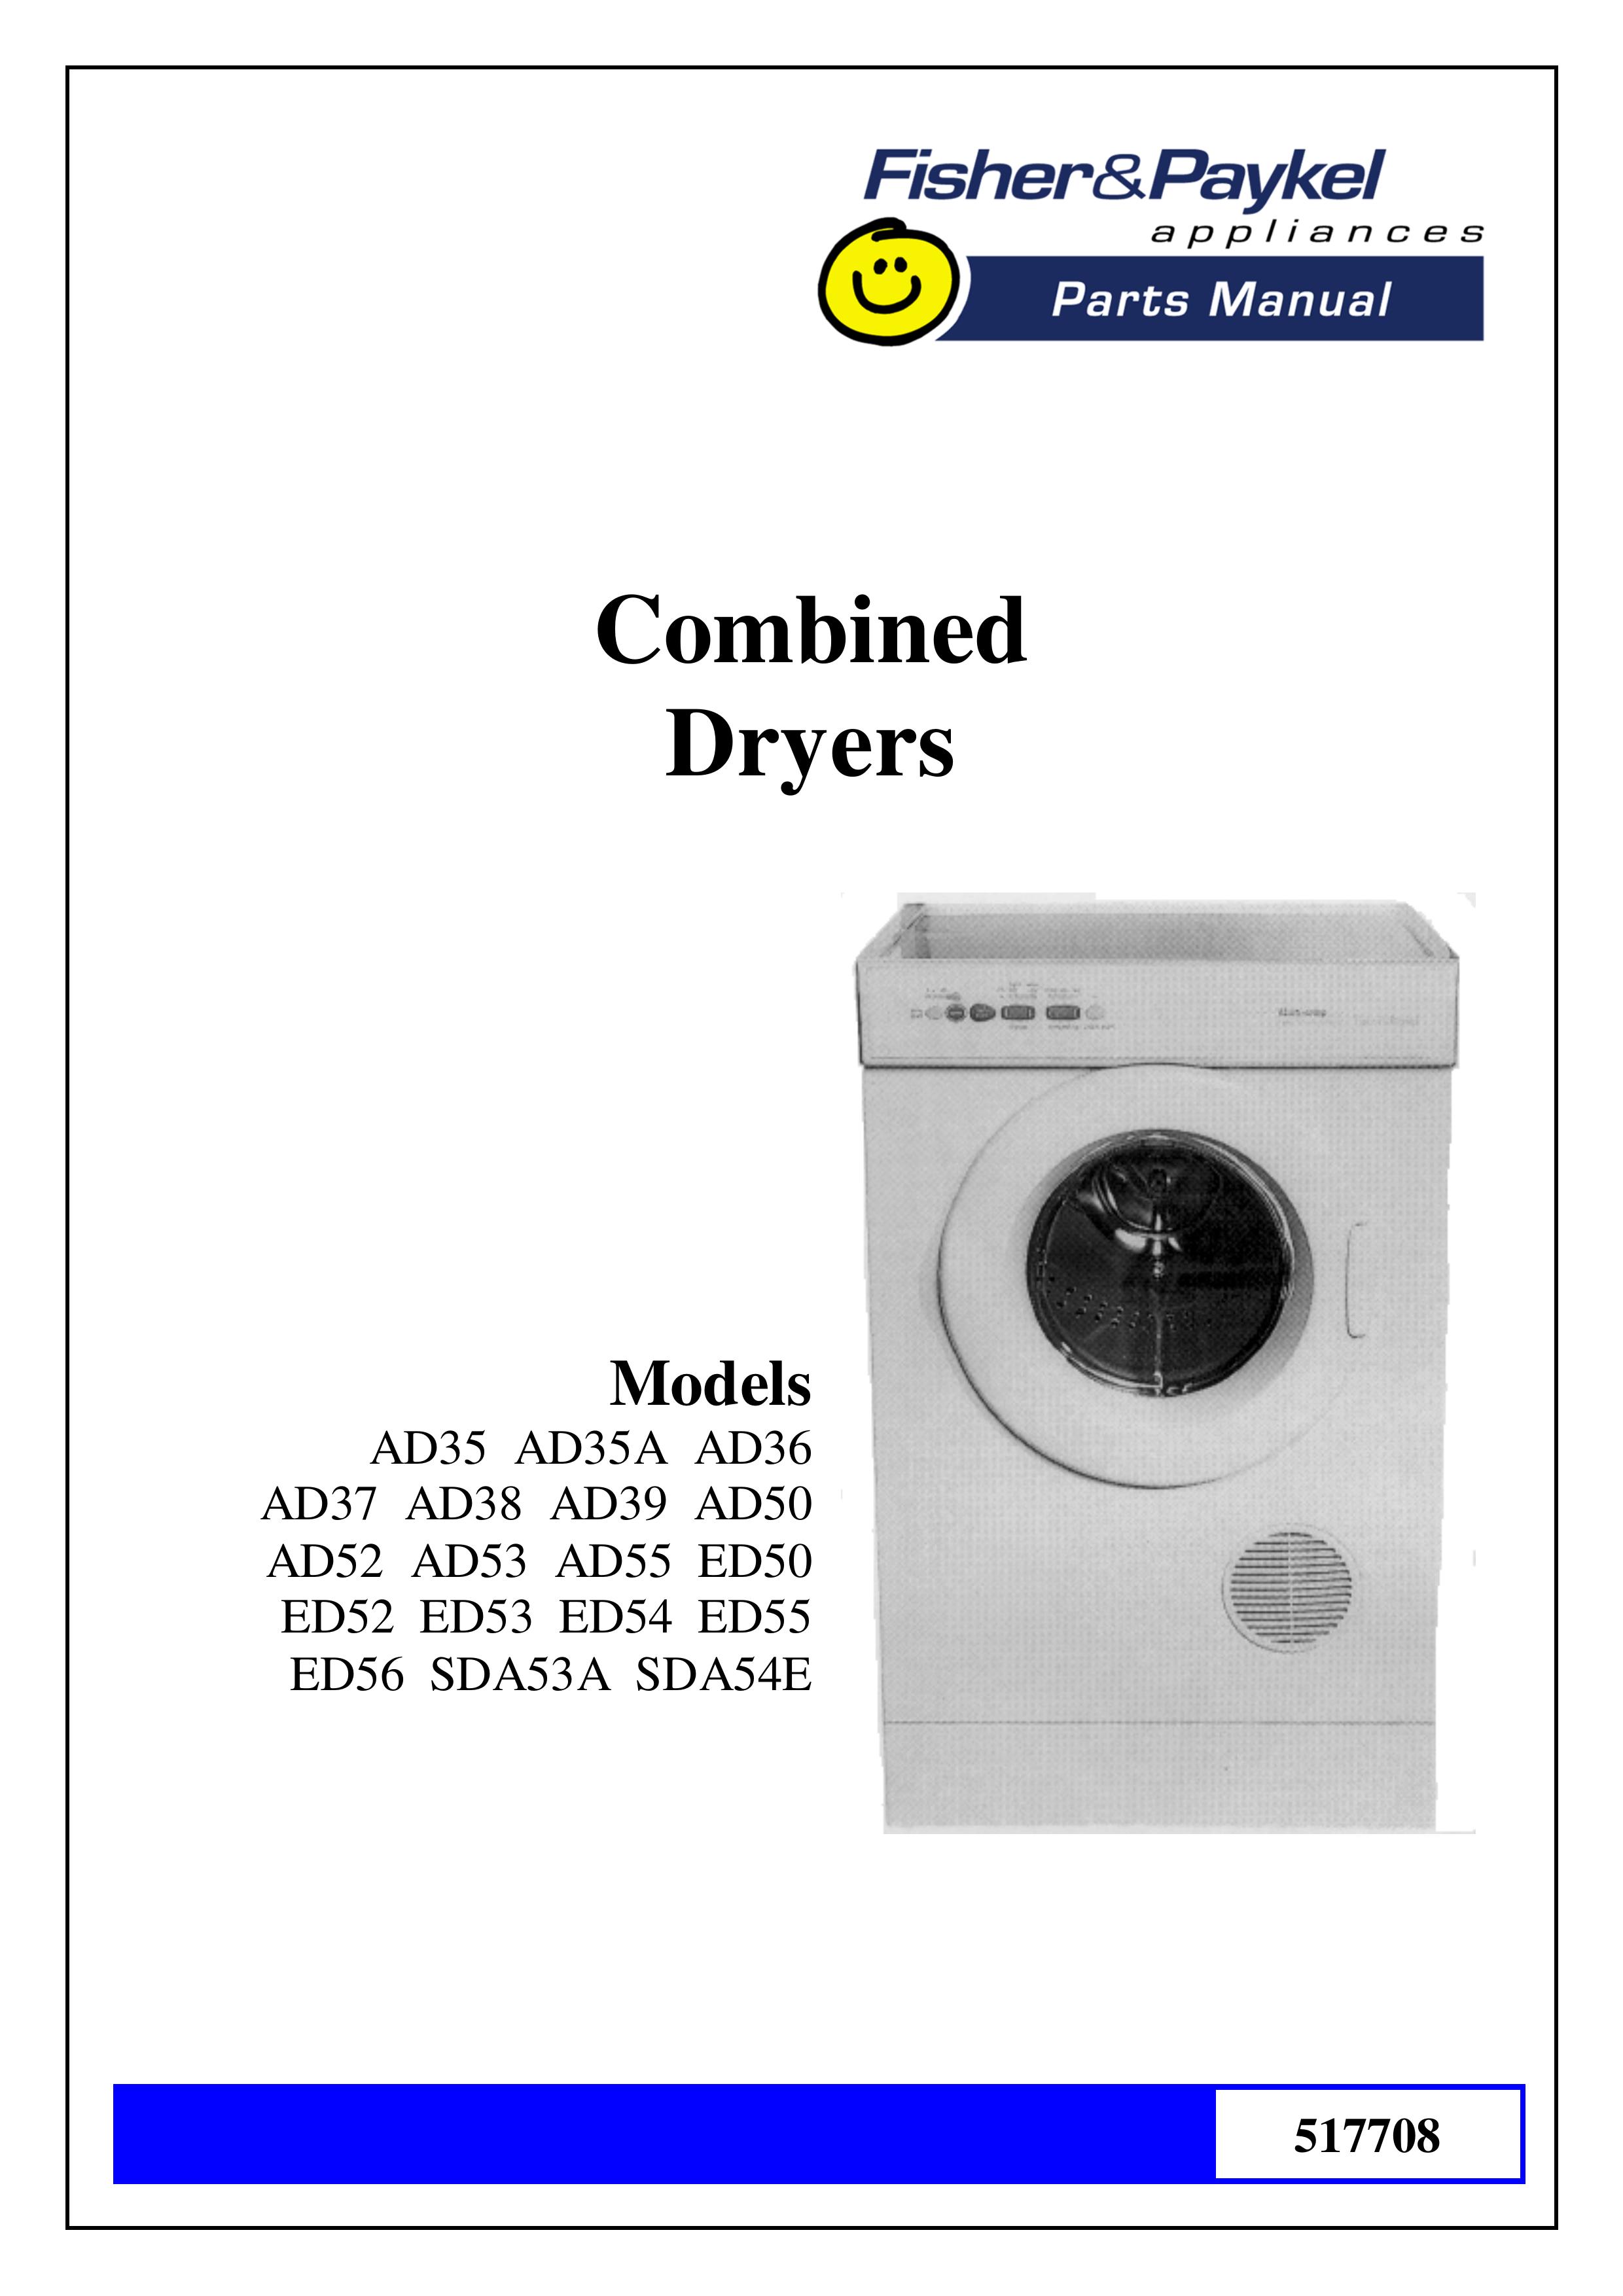 Fisher & Paykel ED53 Clothes Dryer User Manual